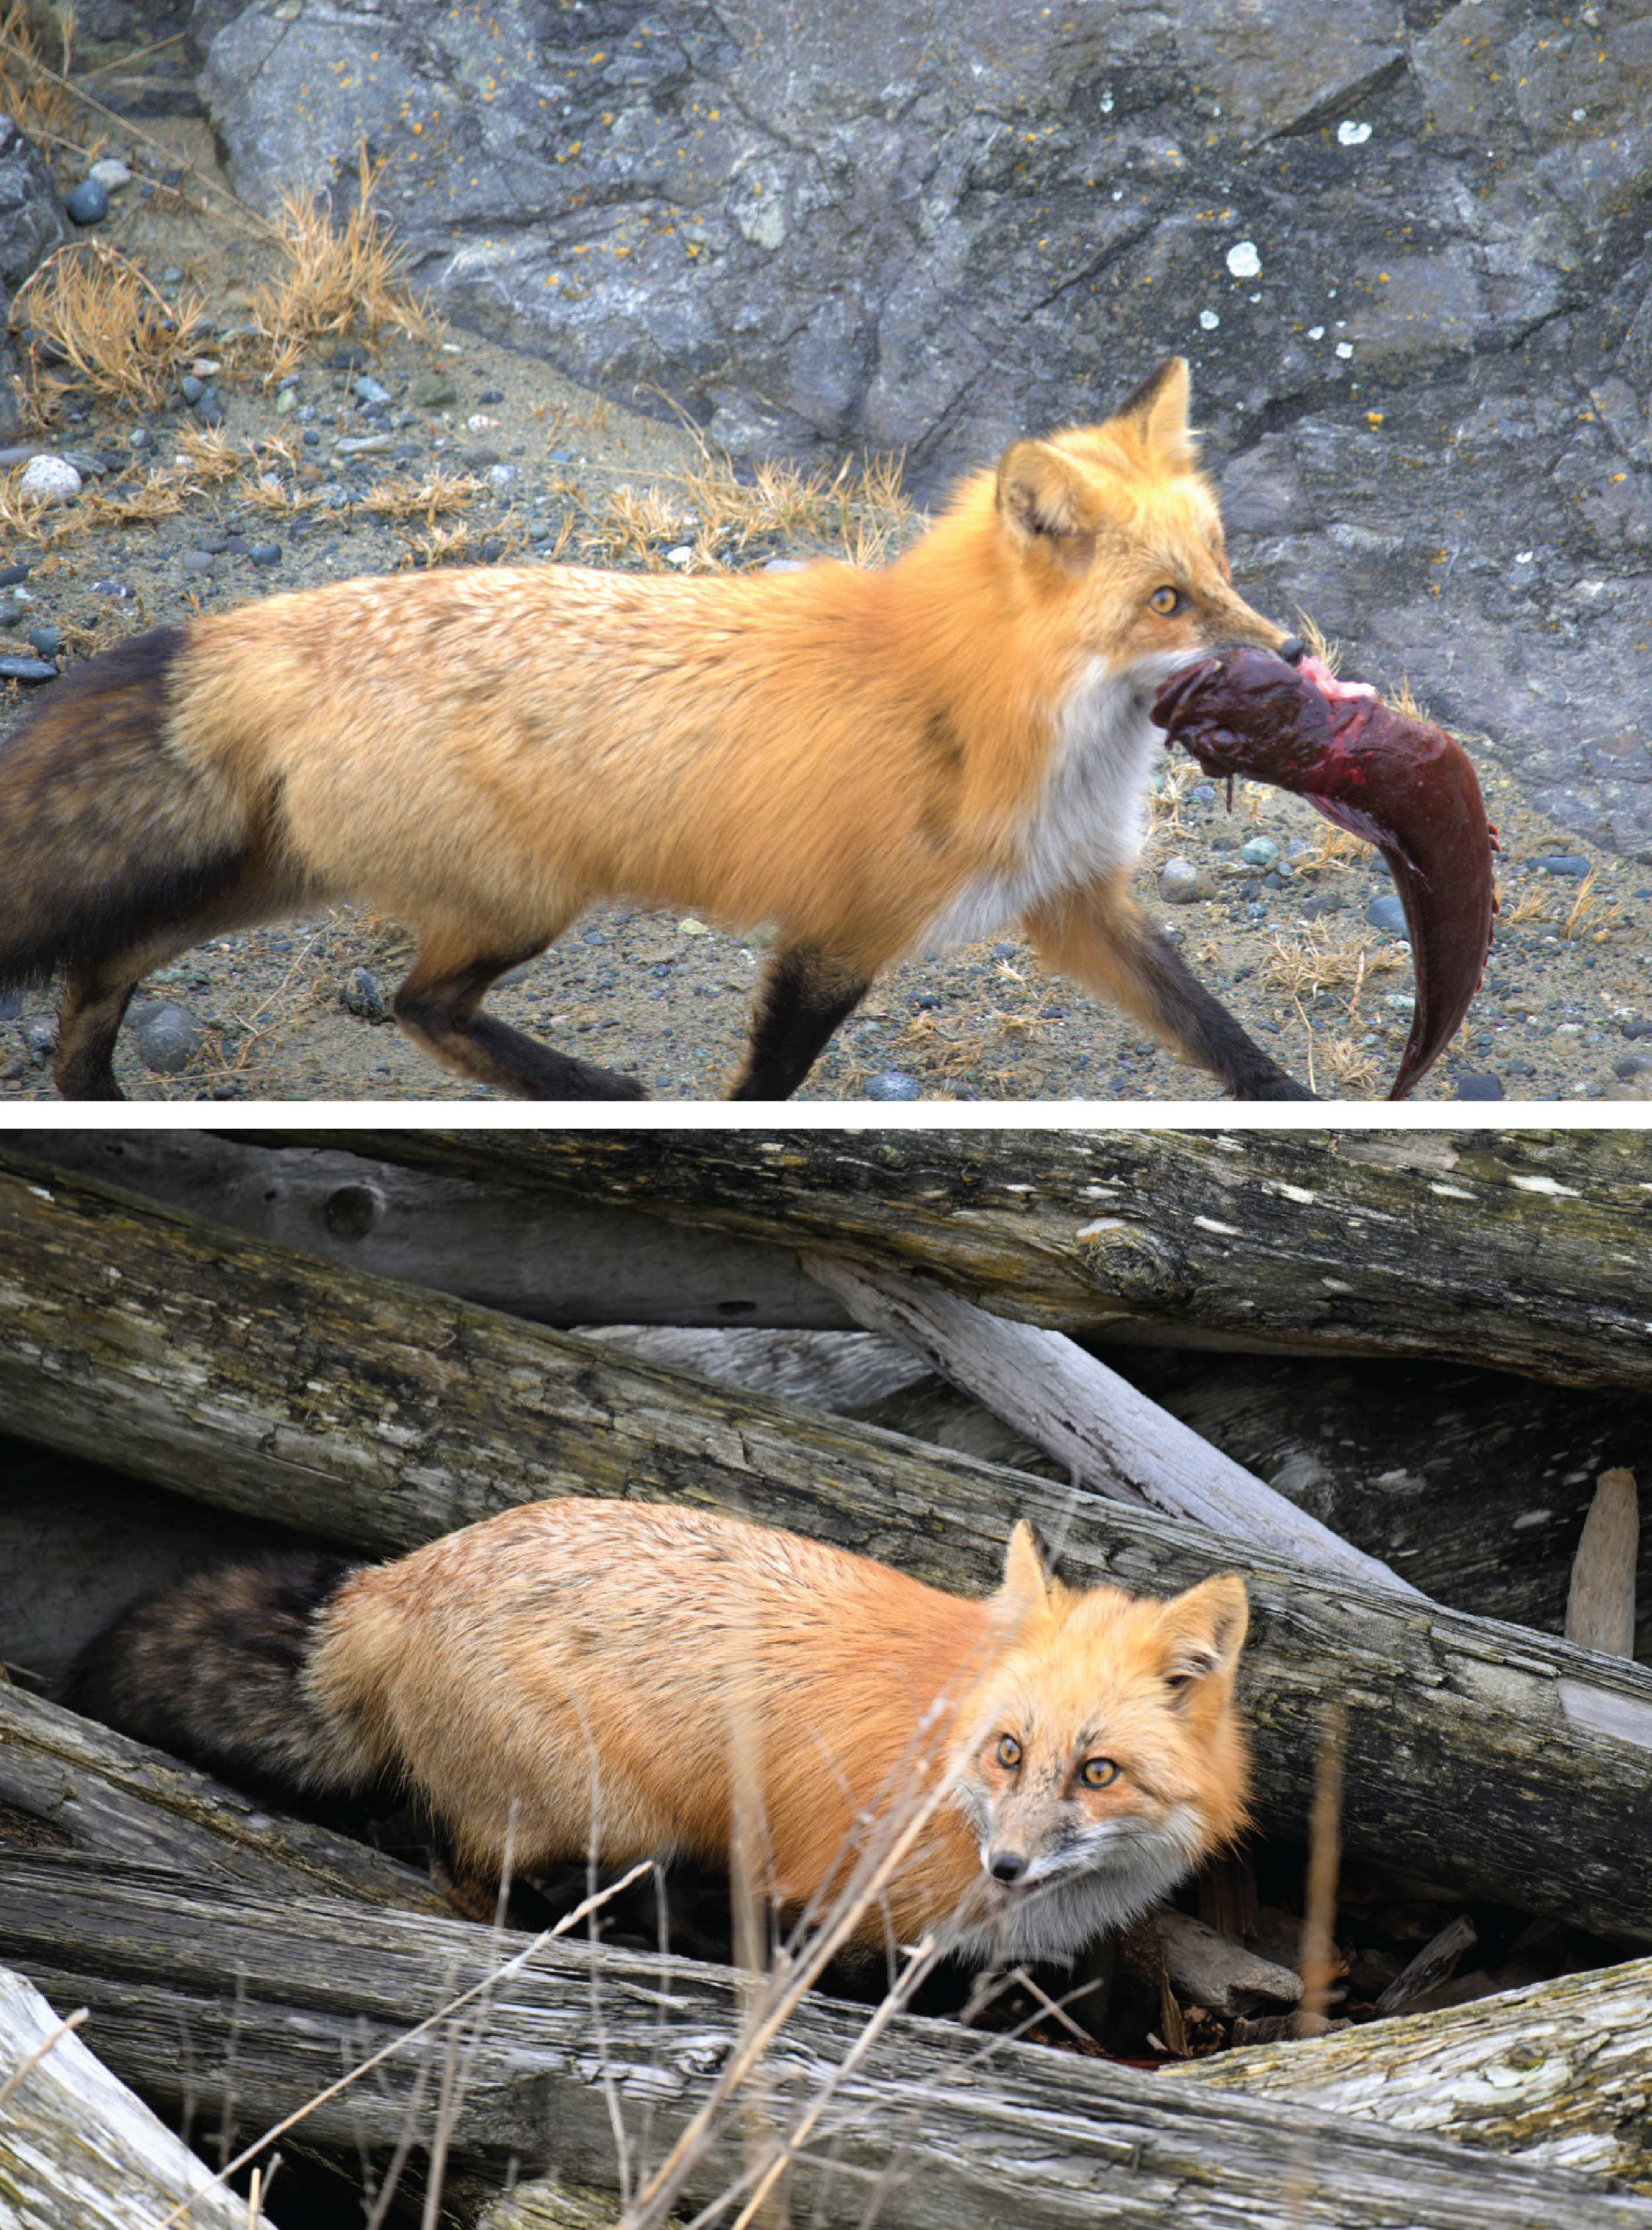 Two photos of same fox. Top image: fox is trotting with dead fish in mouth. Bottom image: fox is peering out from logs with wide eyes.